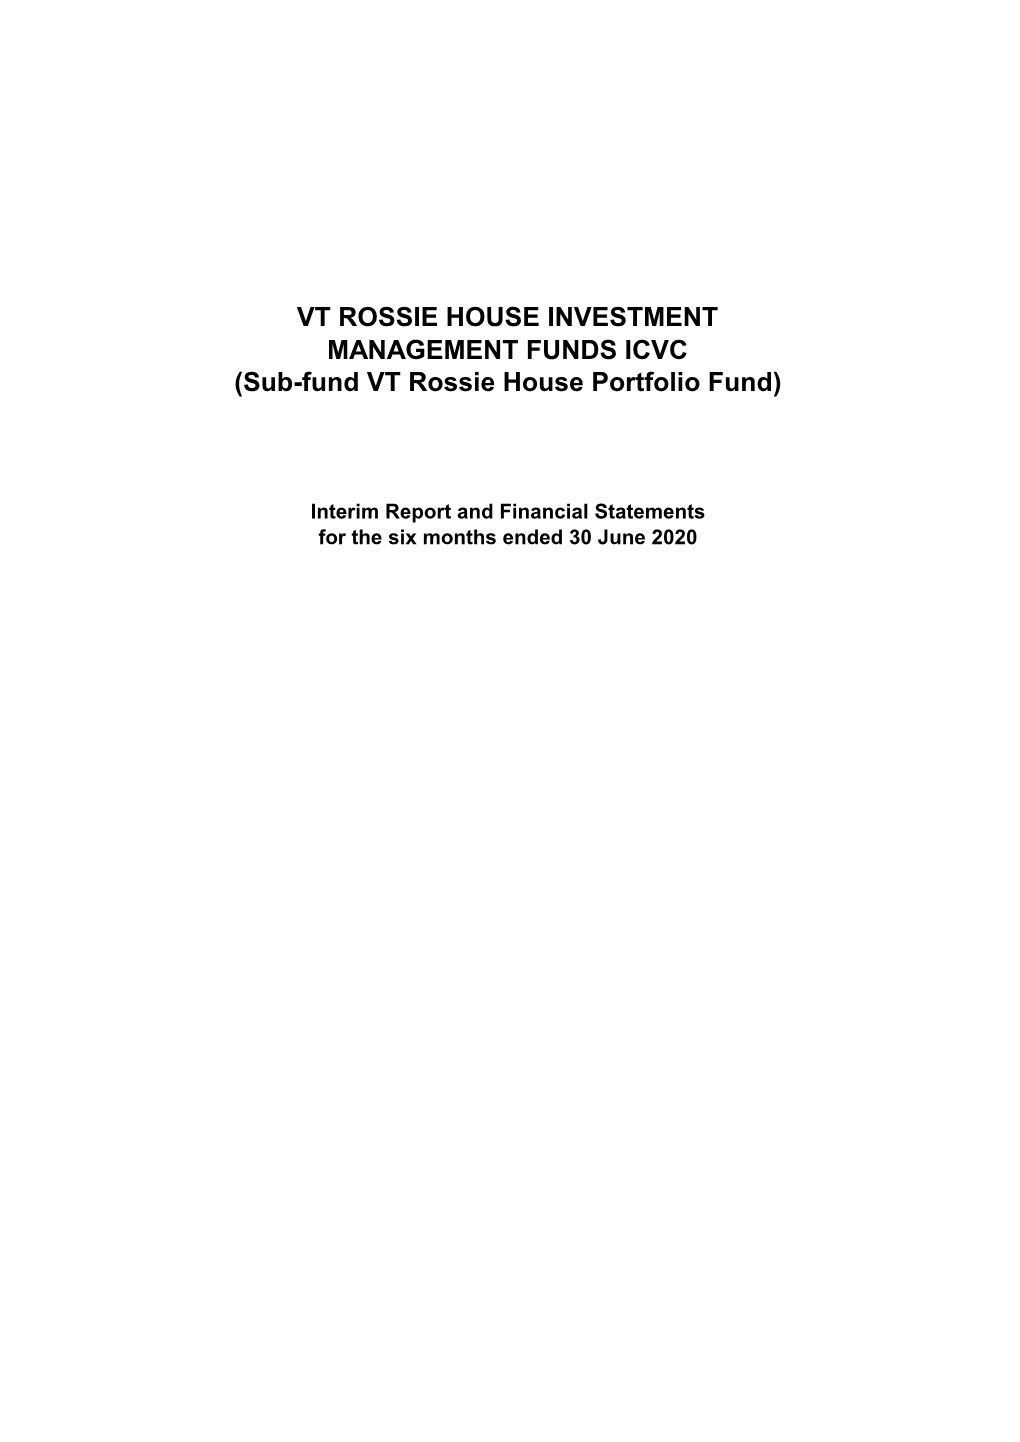 VT ROSSIE HOUSE INVESTMENT MANAGEMENT FUNDS ICVC (Sub-Fund VT Rossie House Portfolio Fund)